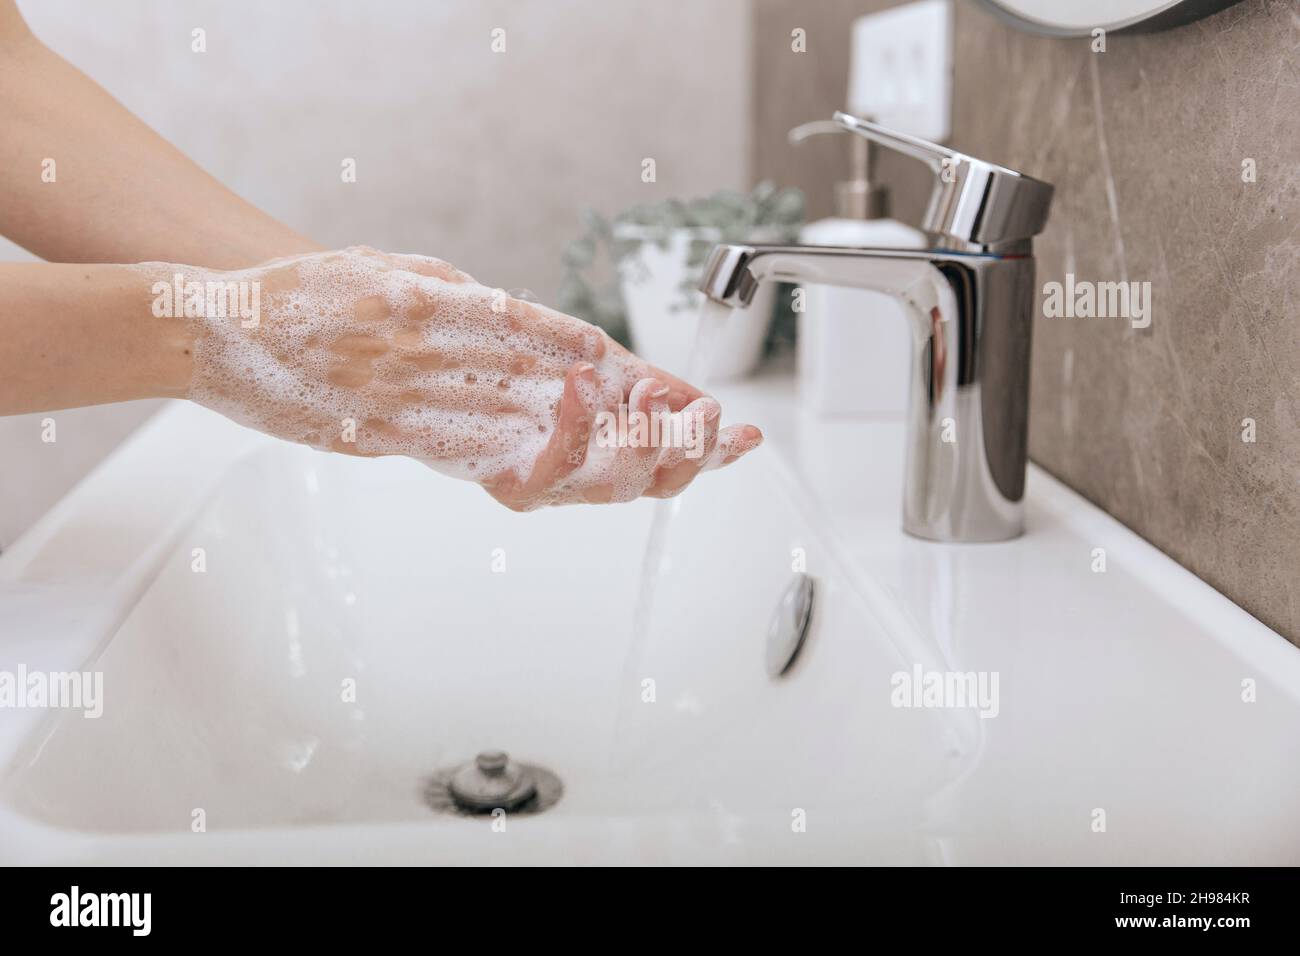 Washing hands under the flowing water tap. Hygiene concept hand detail. Washing hands rubbing with soap for corona virus prevention, hygiene to stop Stock Photo